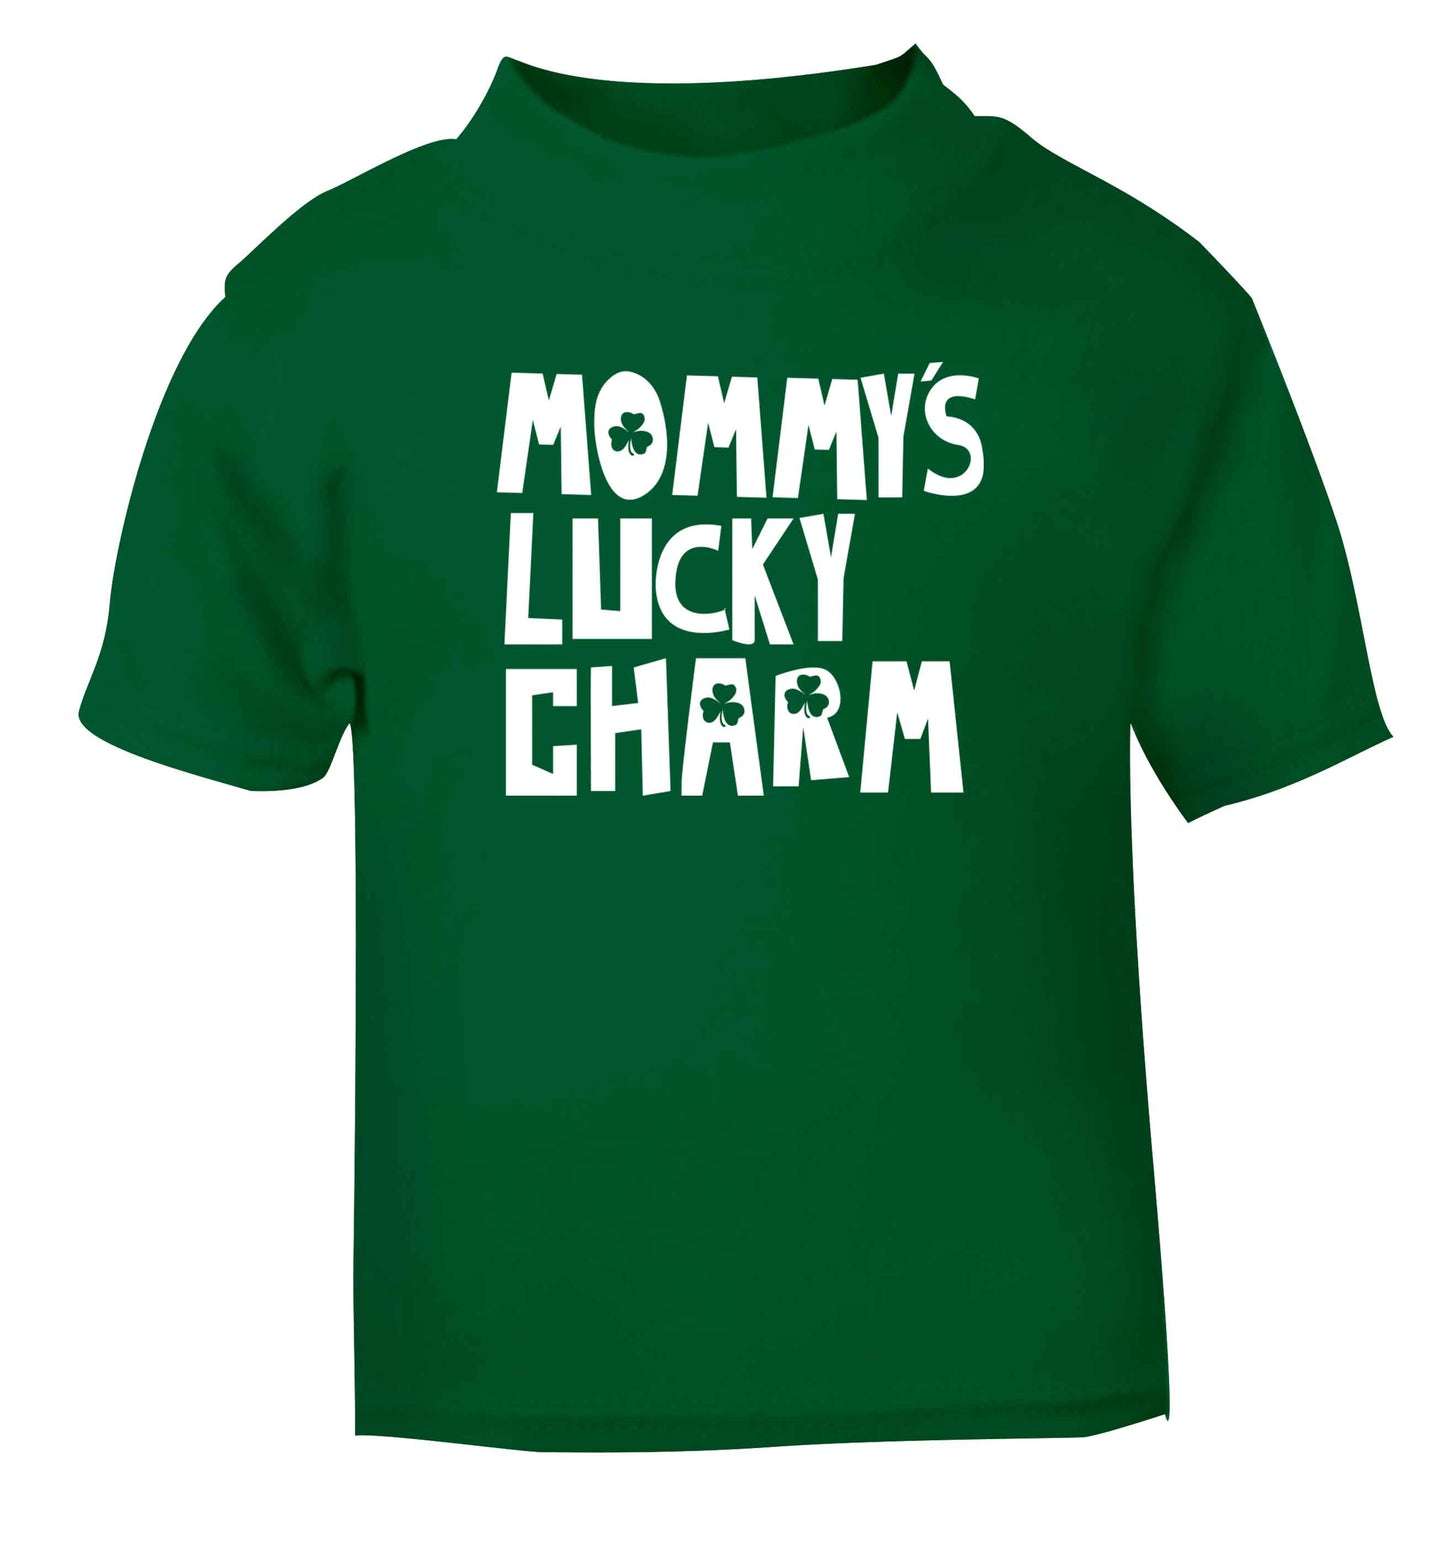 Mommy's lucky charm green baby toddler Tshirt 2 Years